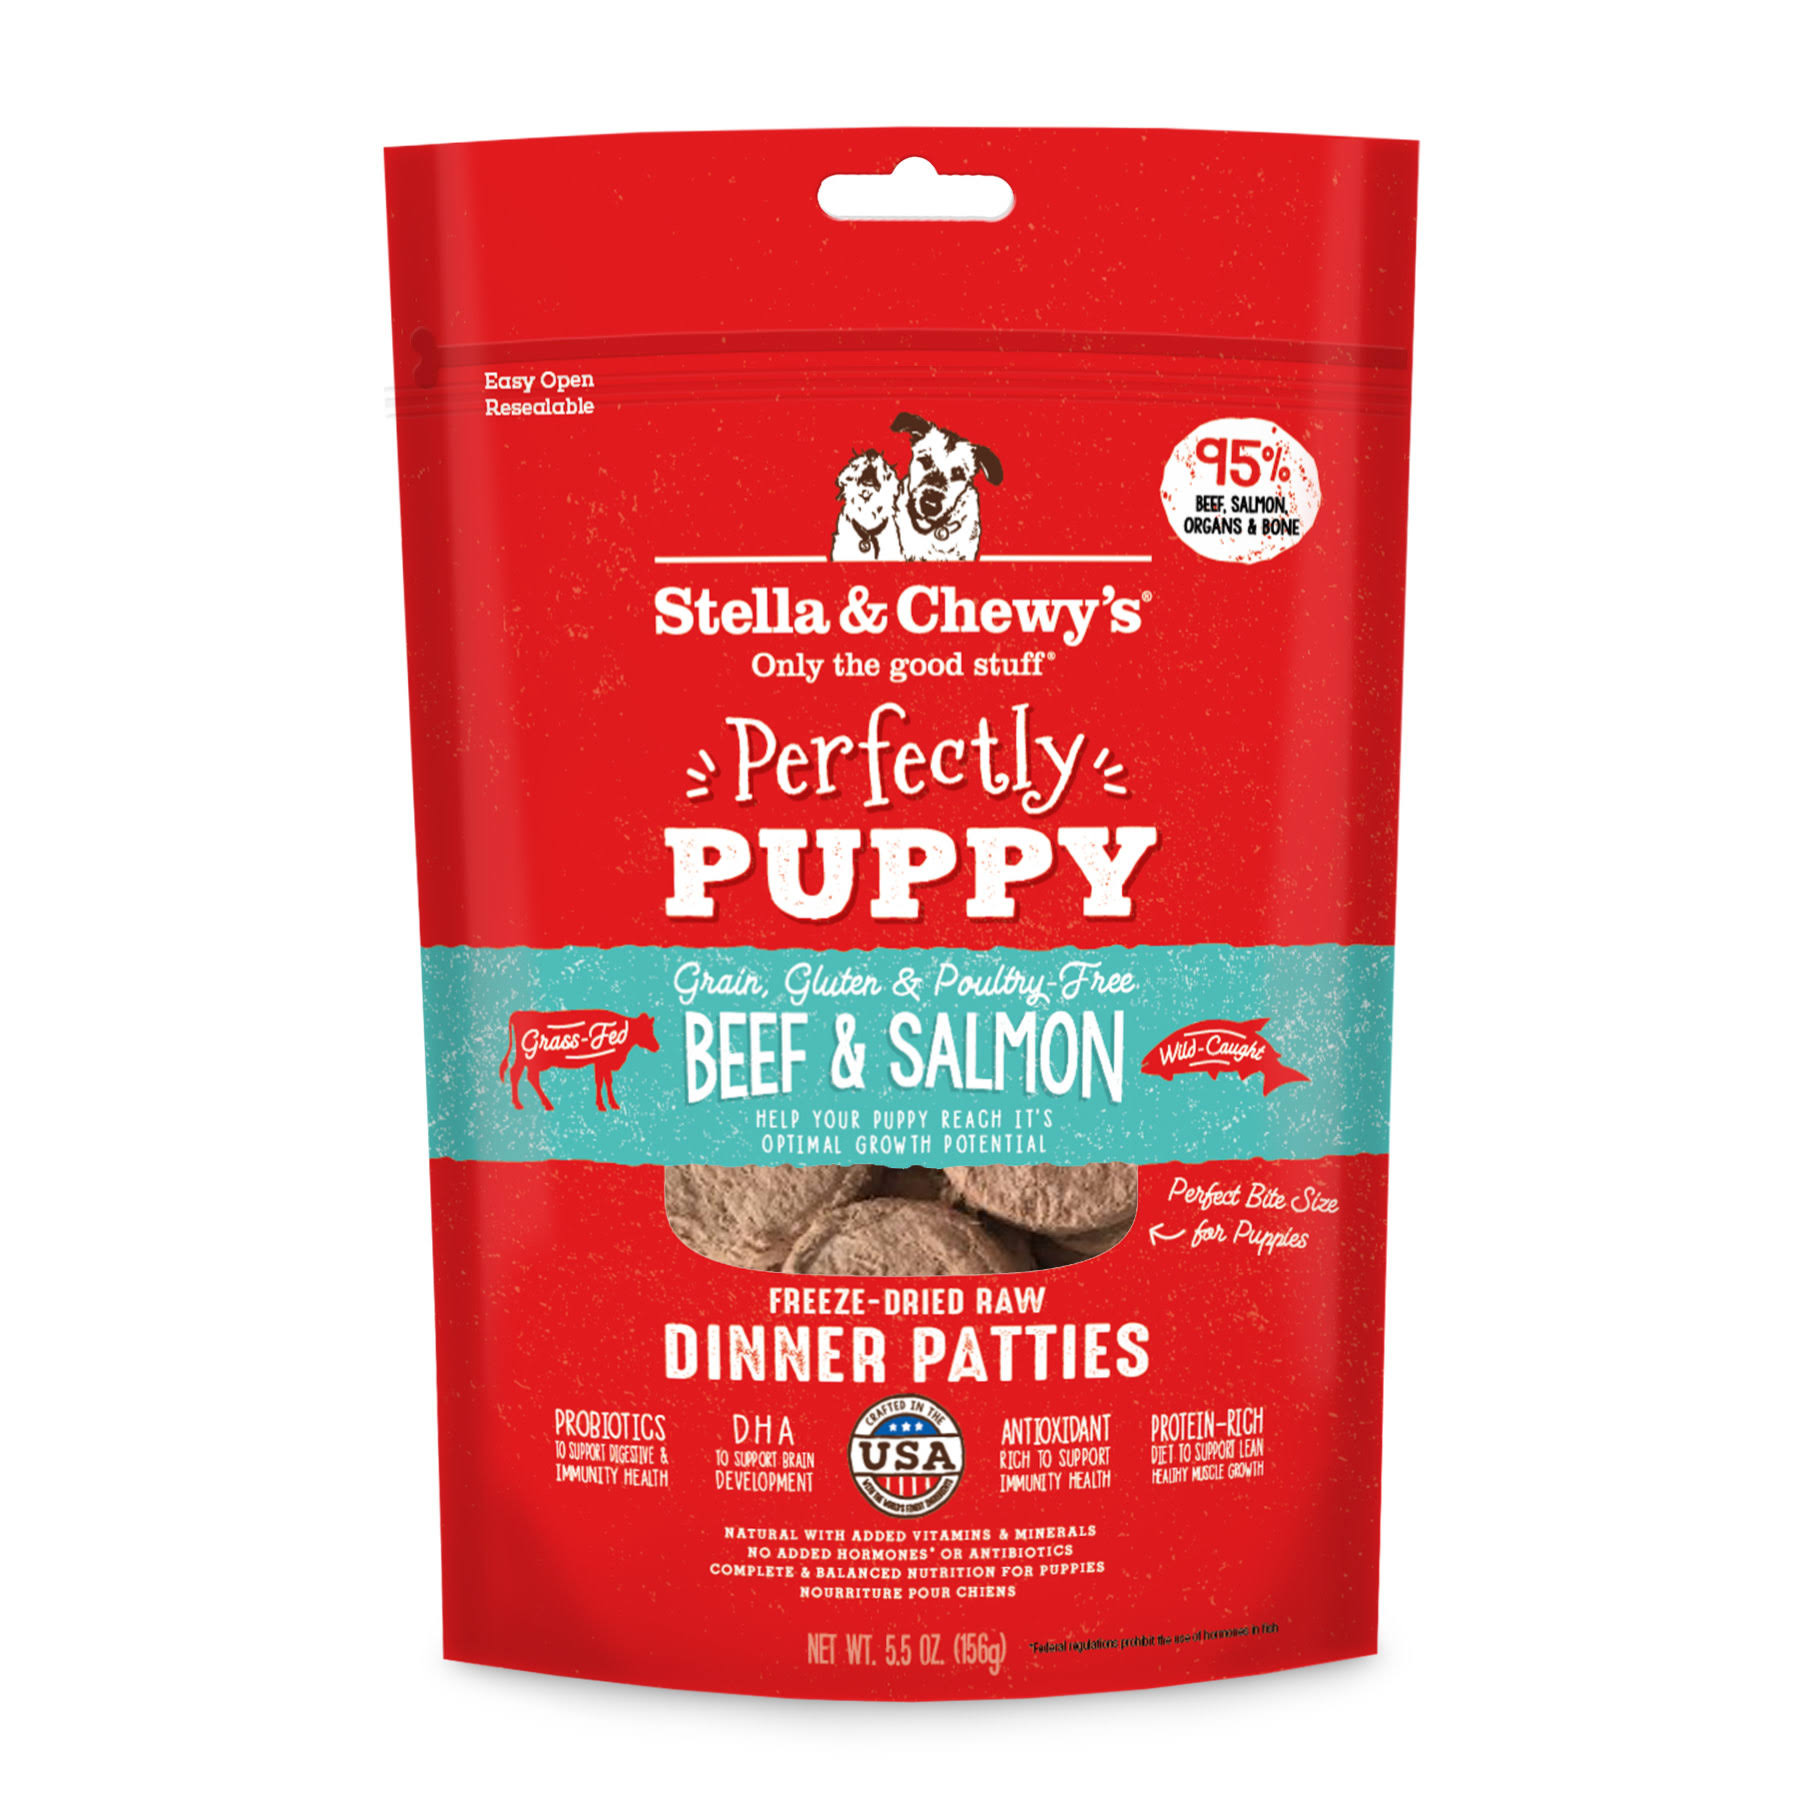 Stella & Chewy's Beef and Salmon Puppy Dinner Patties Freeze-Dried Raw Dog Food 14 oz